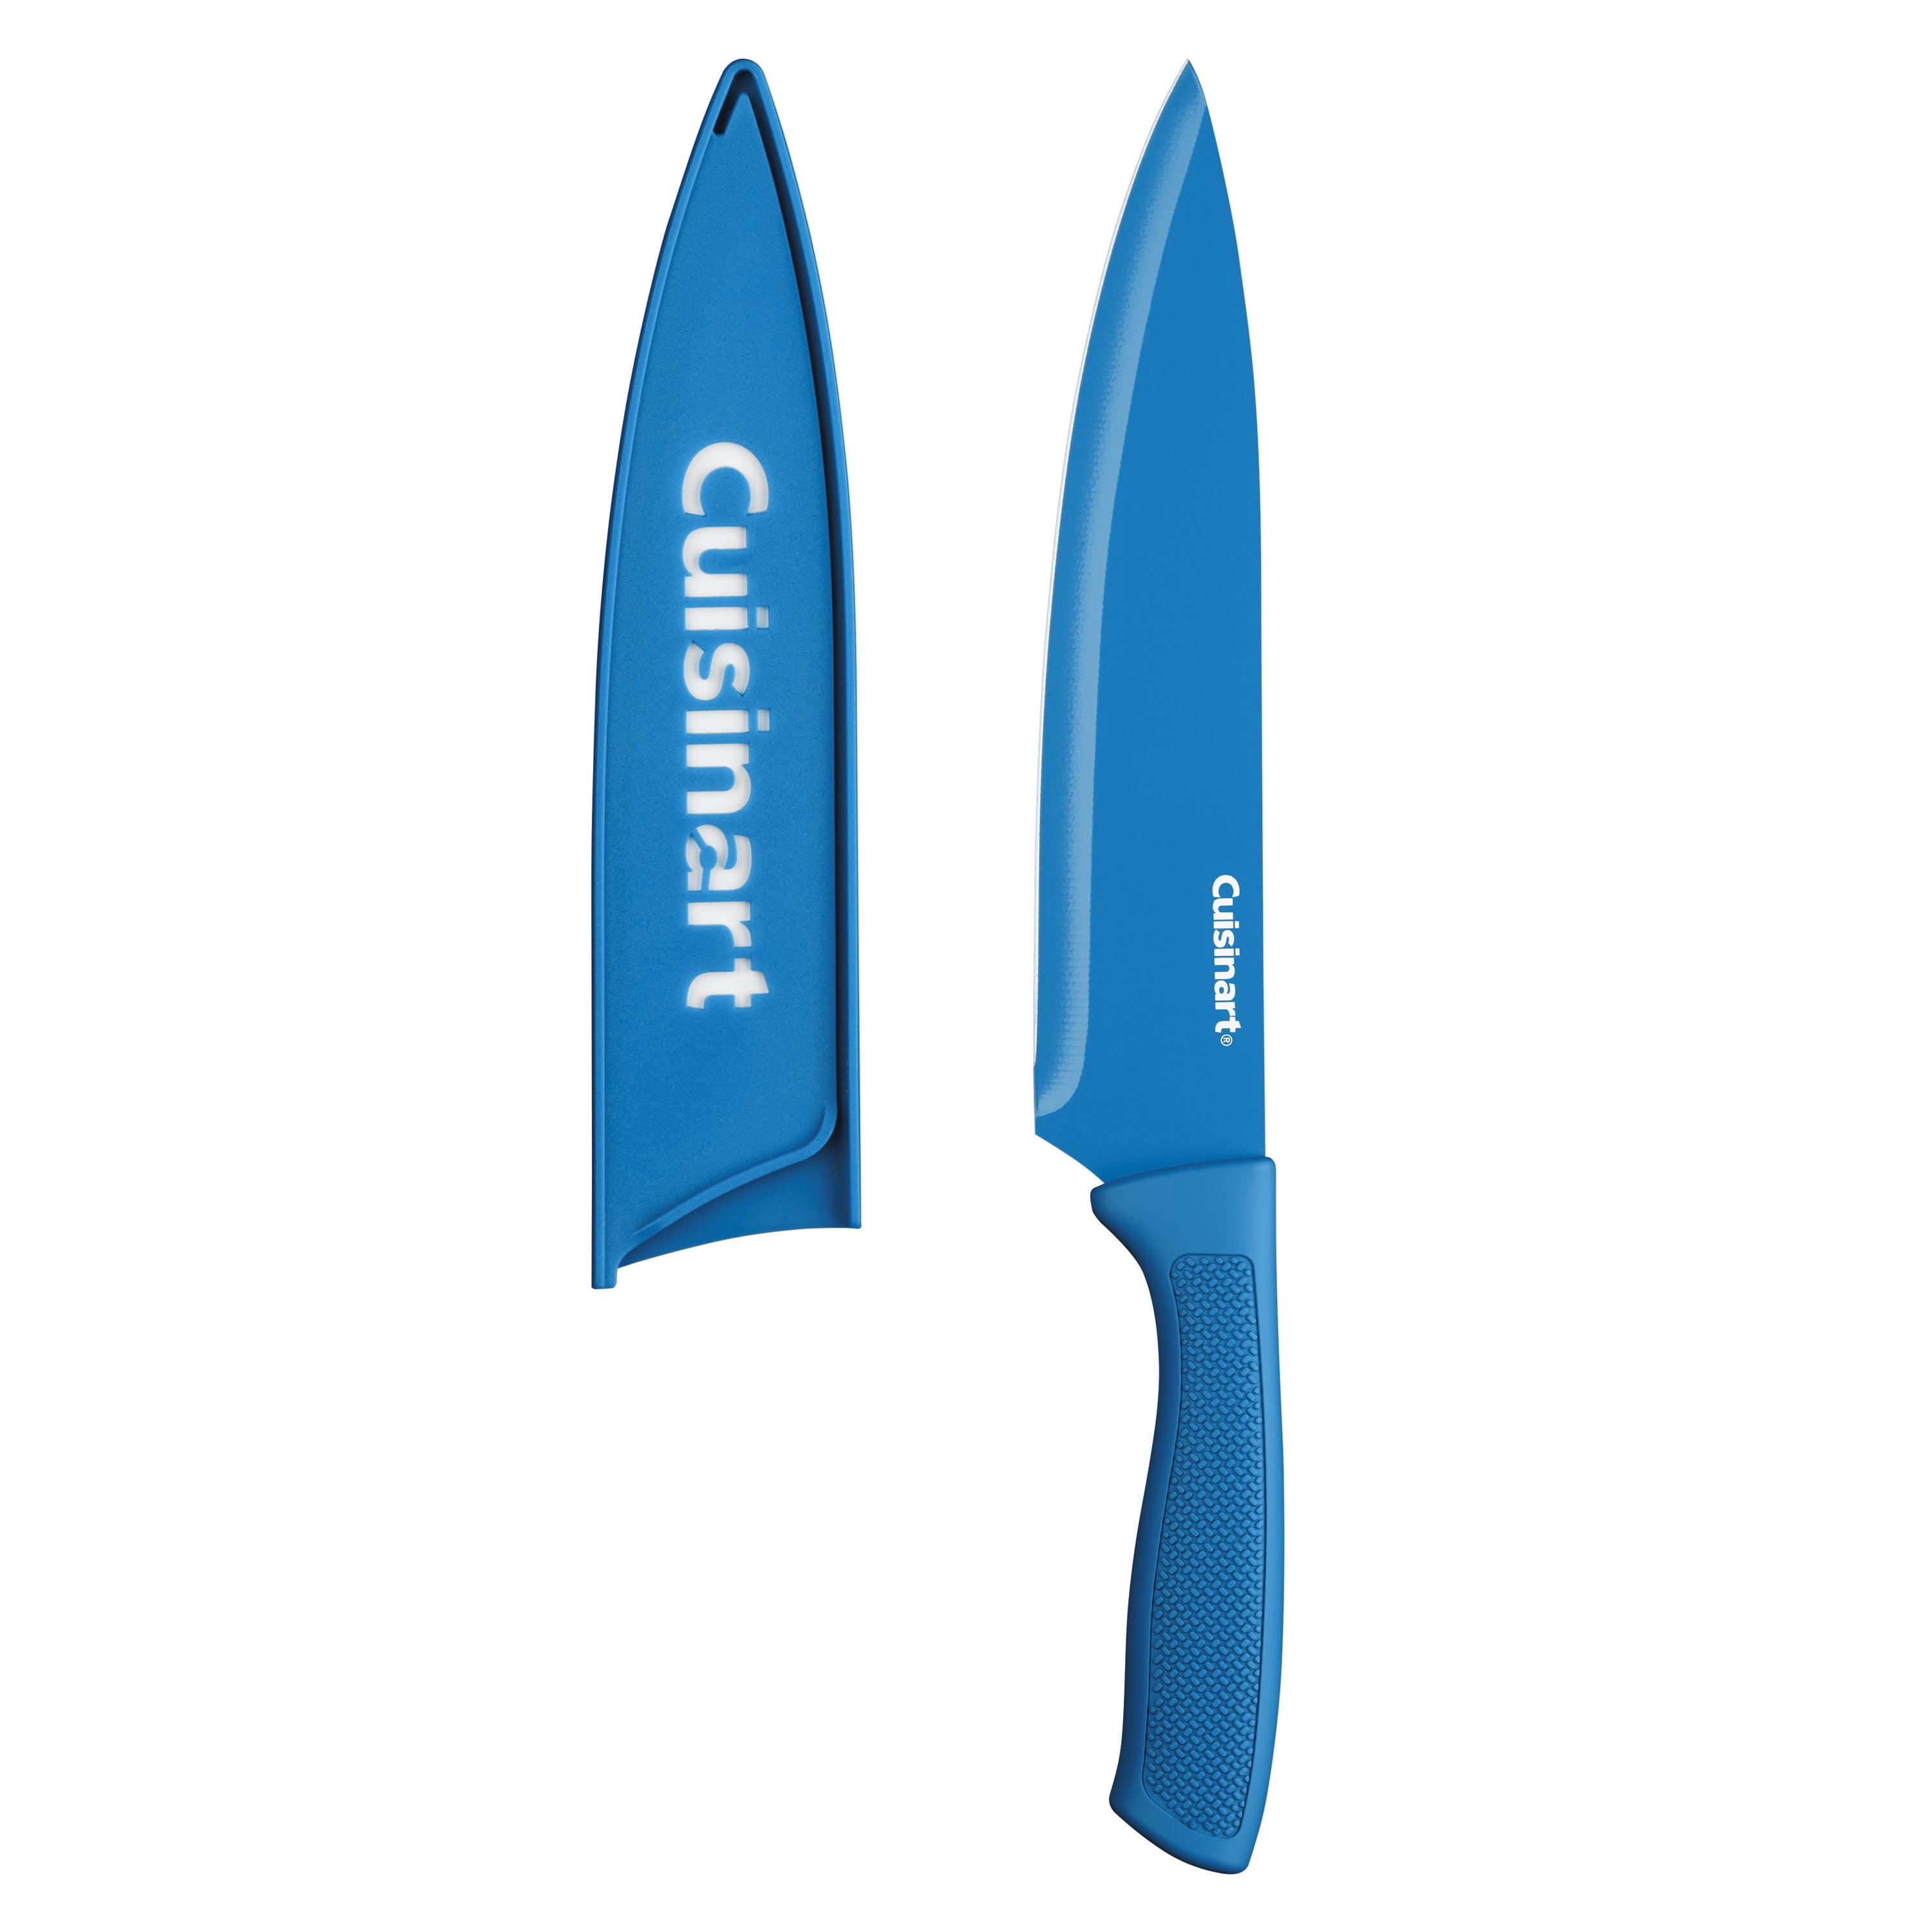 Cuisinart C55-12PR1 12-Piece Printed Color Knife Set with Blade Guards, Multicolored